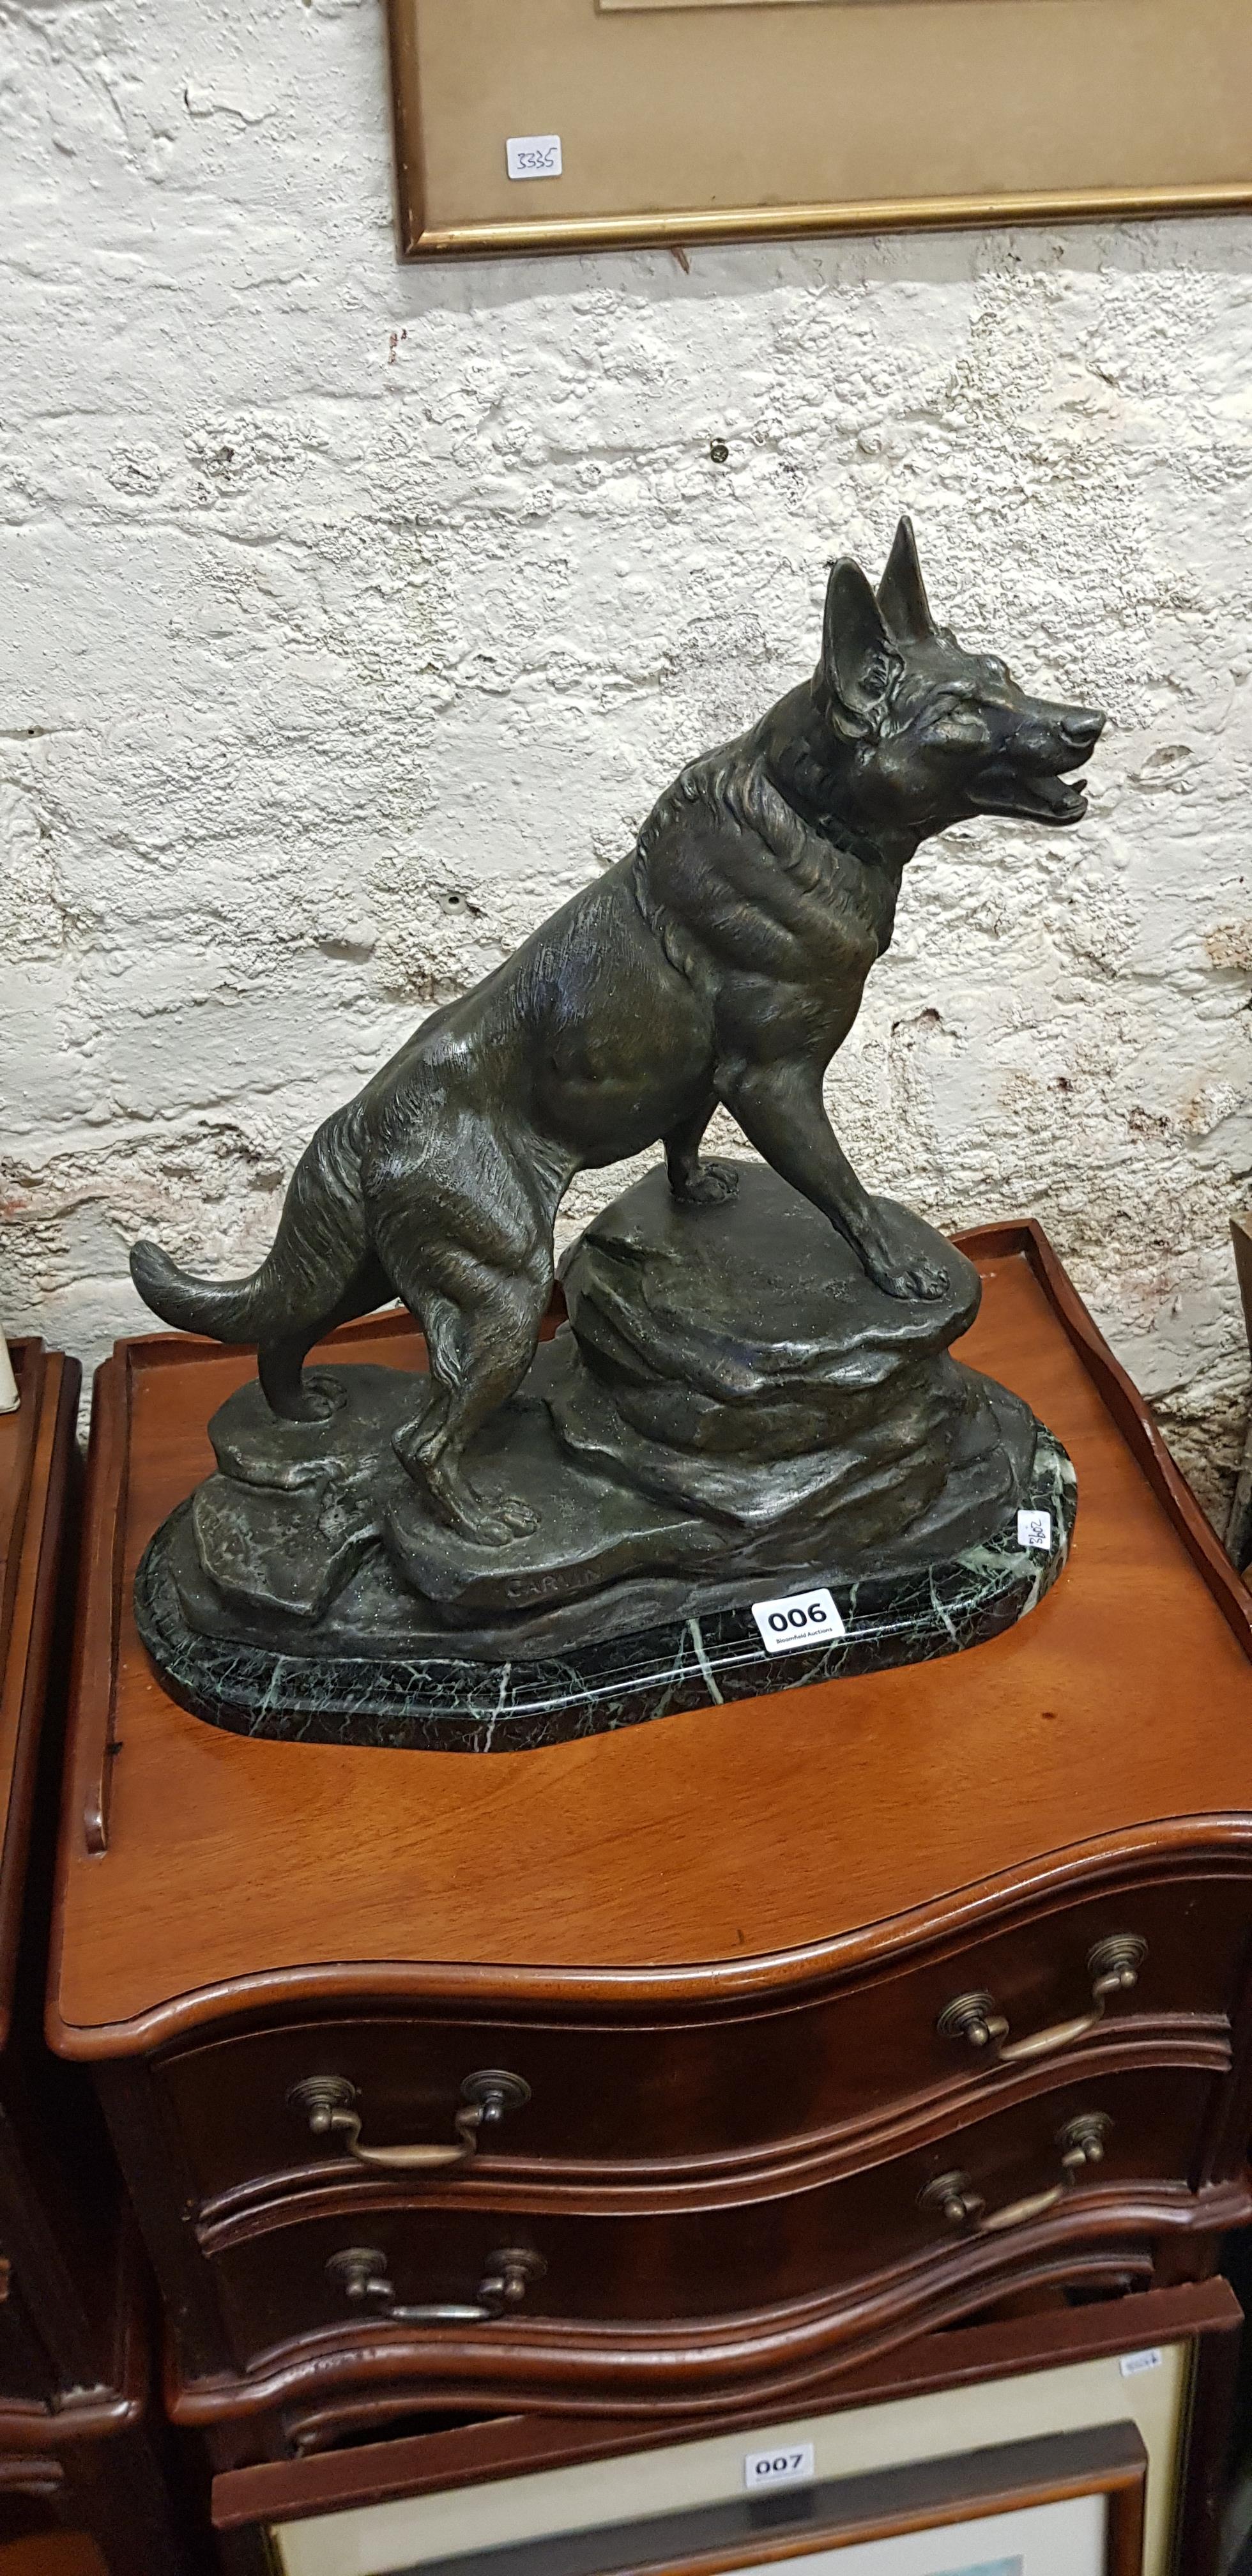 EARLY 20TH CENTURY SPELTER FIGURE OF AN ALSATION